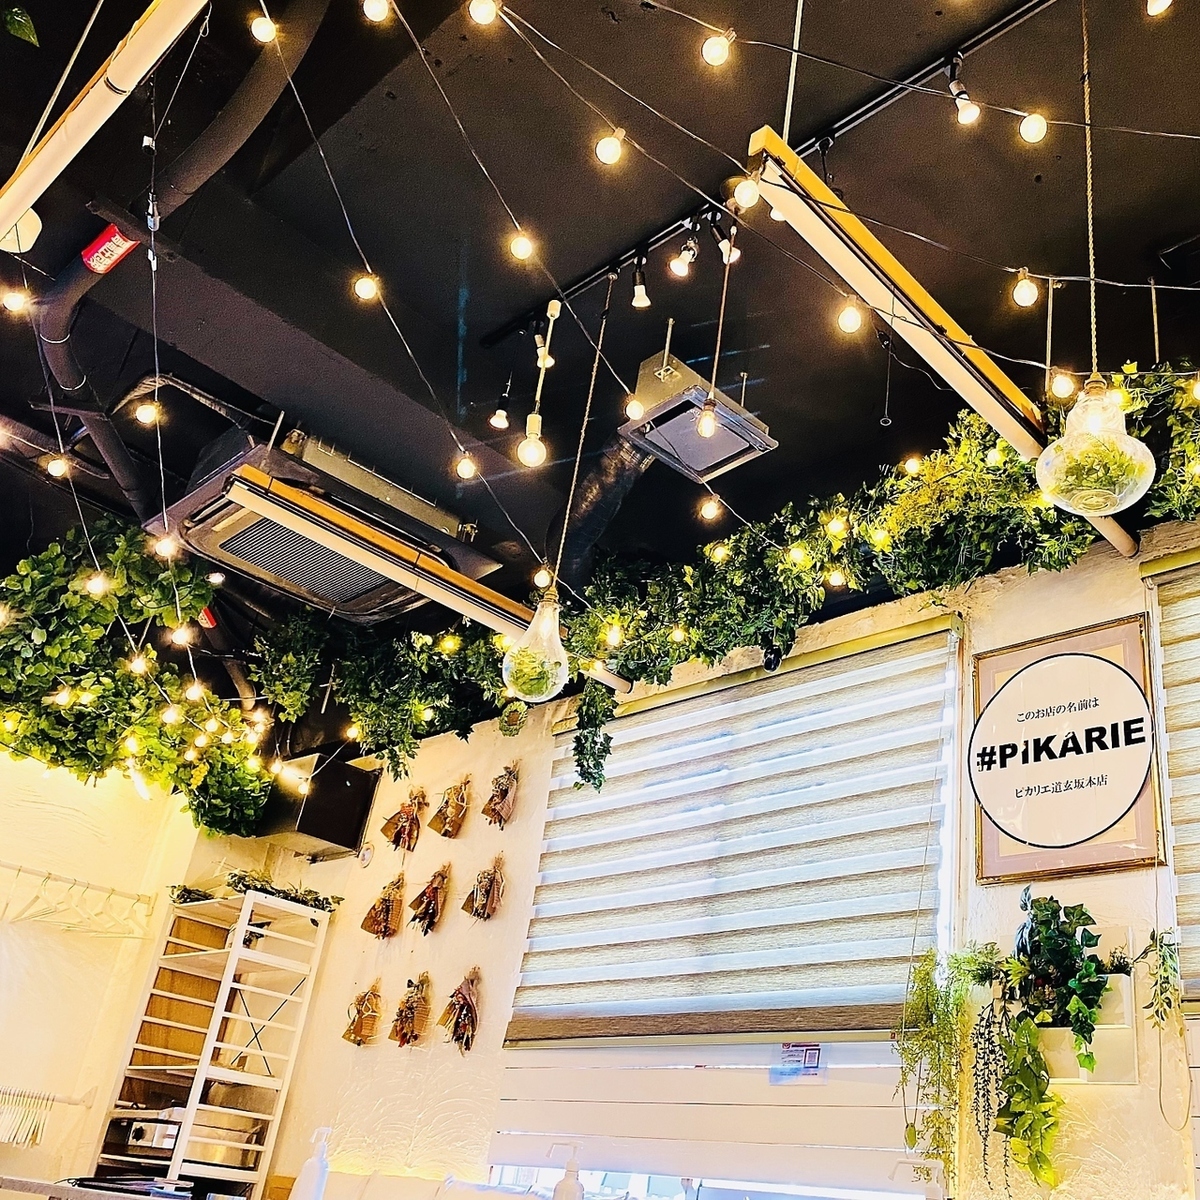 If you want to have a private social gathering or thank-you party in Shibuya, we recommend Shibuya Picarie Main Store!